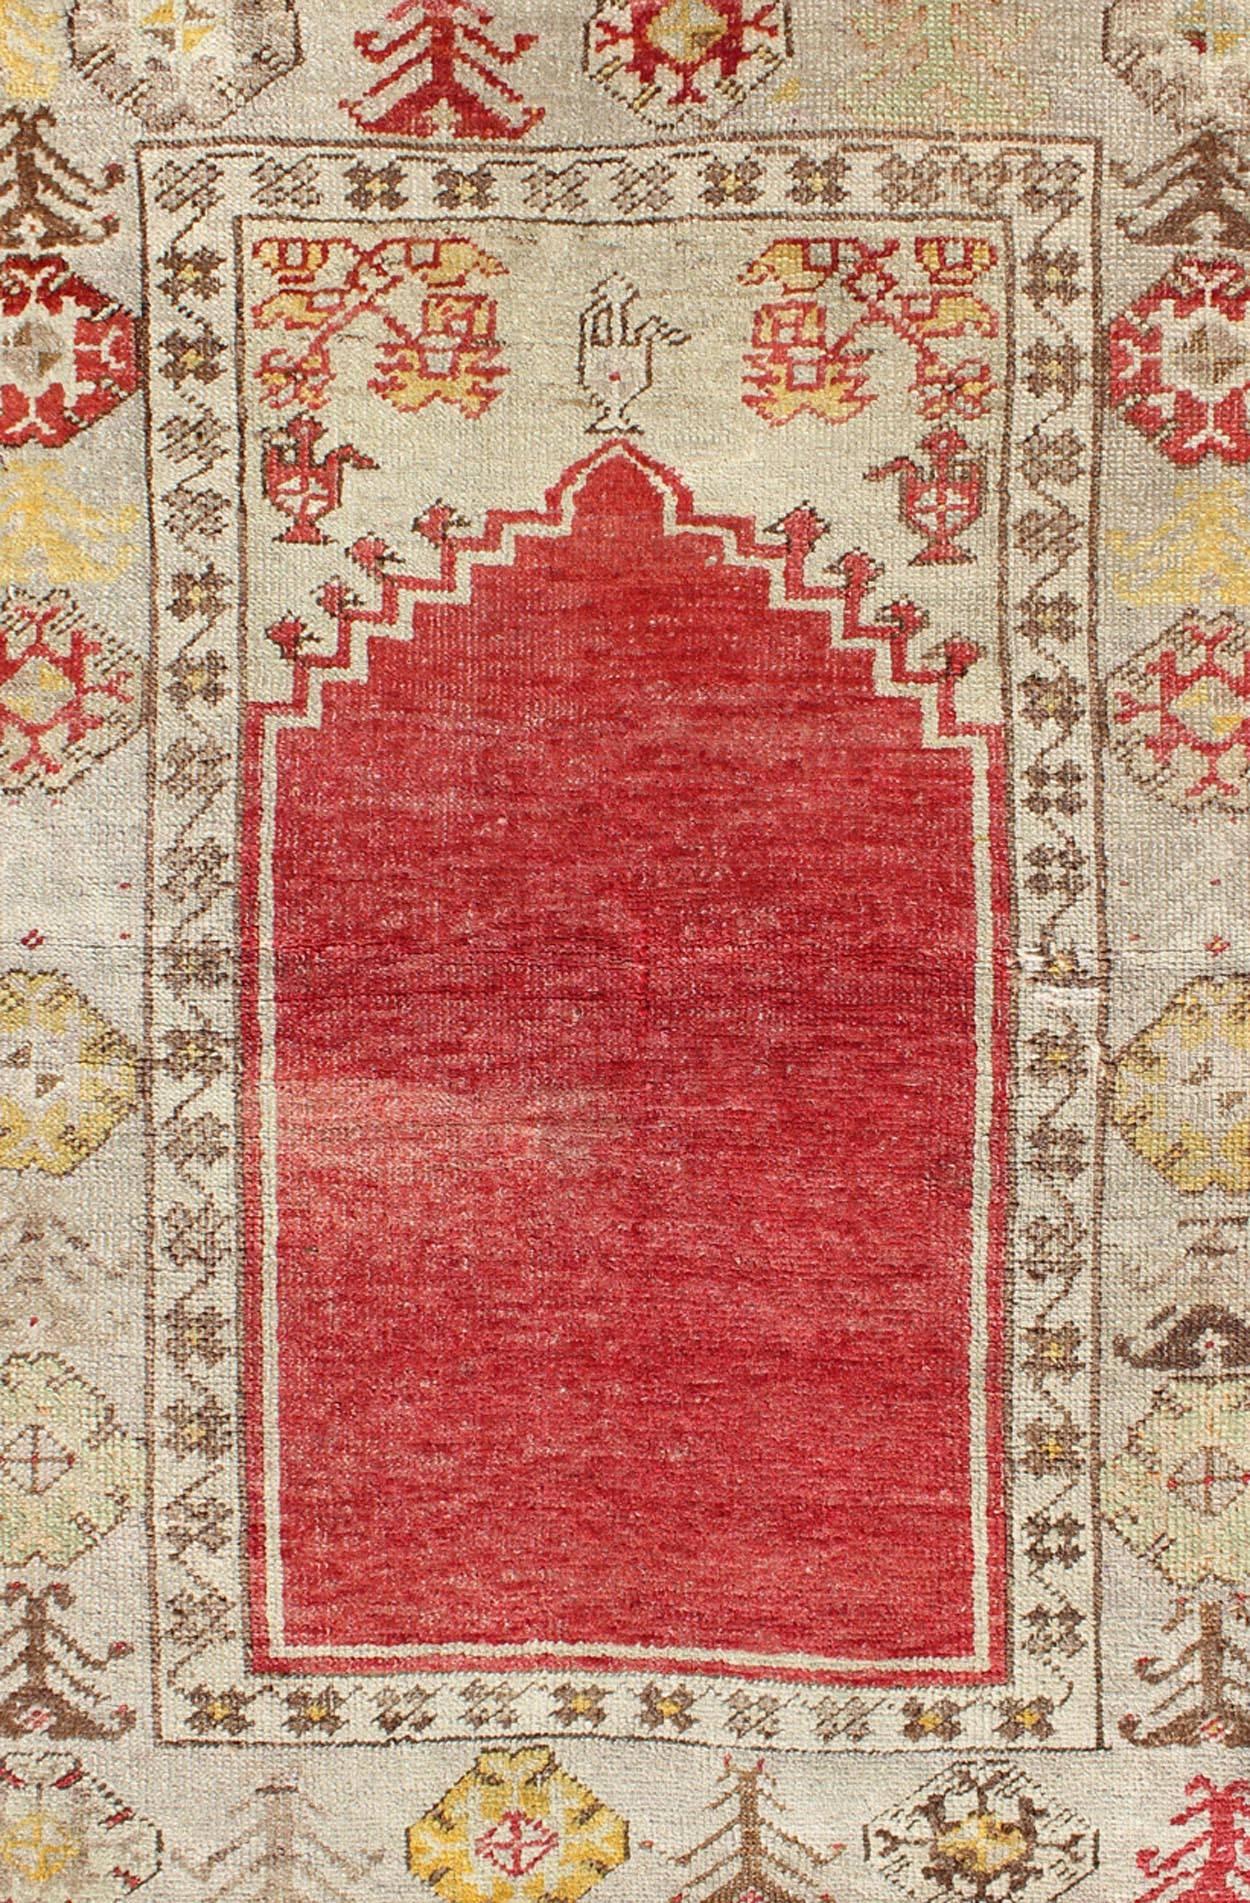 Hand-Knotted Antique Turkish Oushak Prayer Rug in Red, Ivory, Green, and Yellow